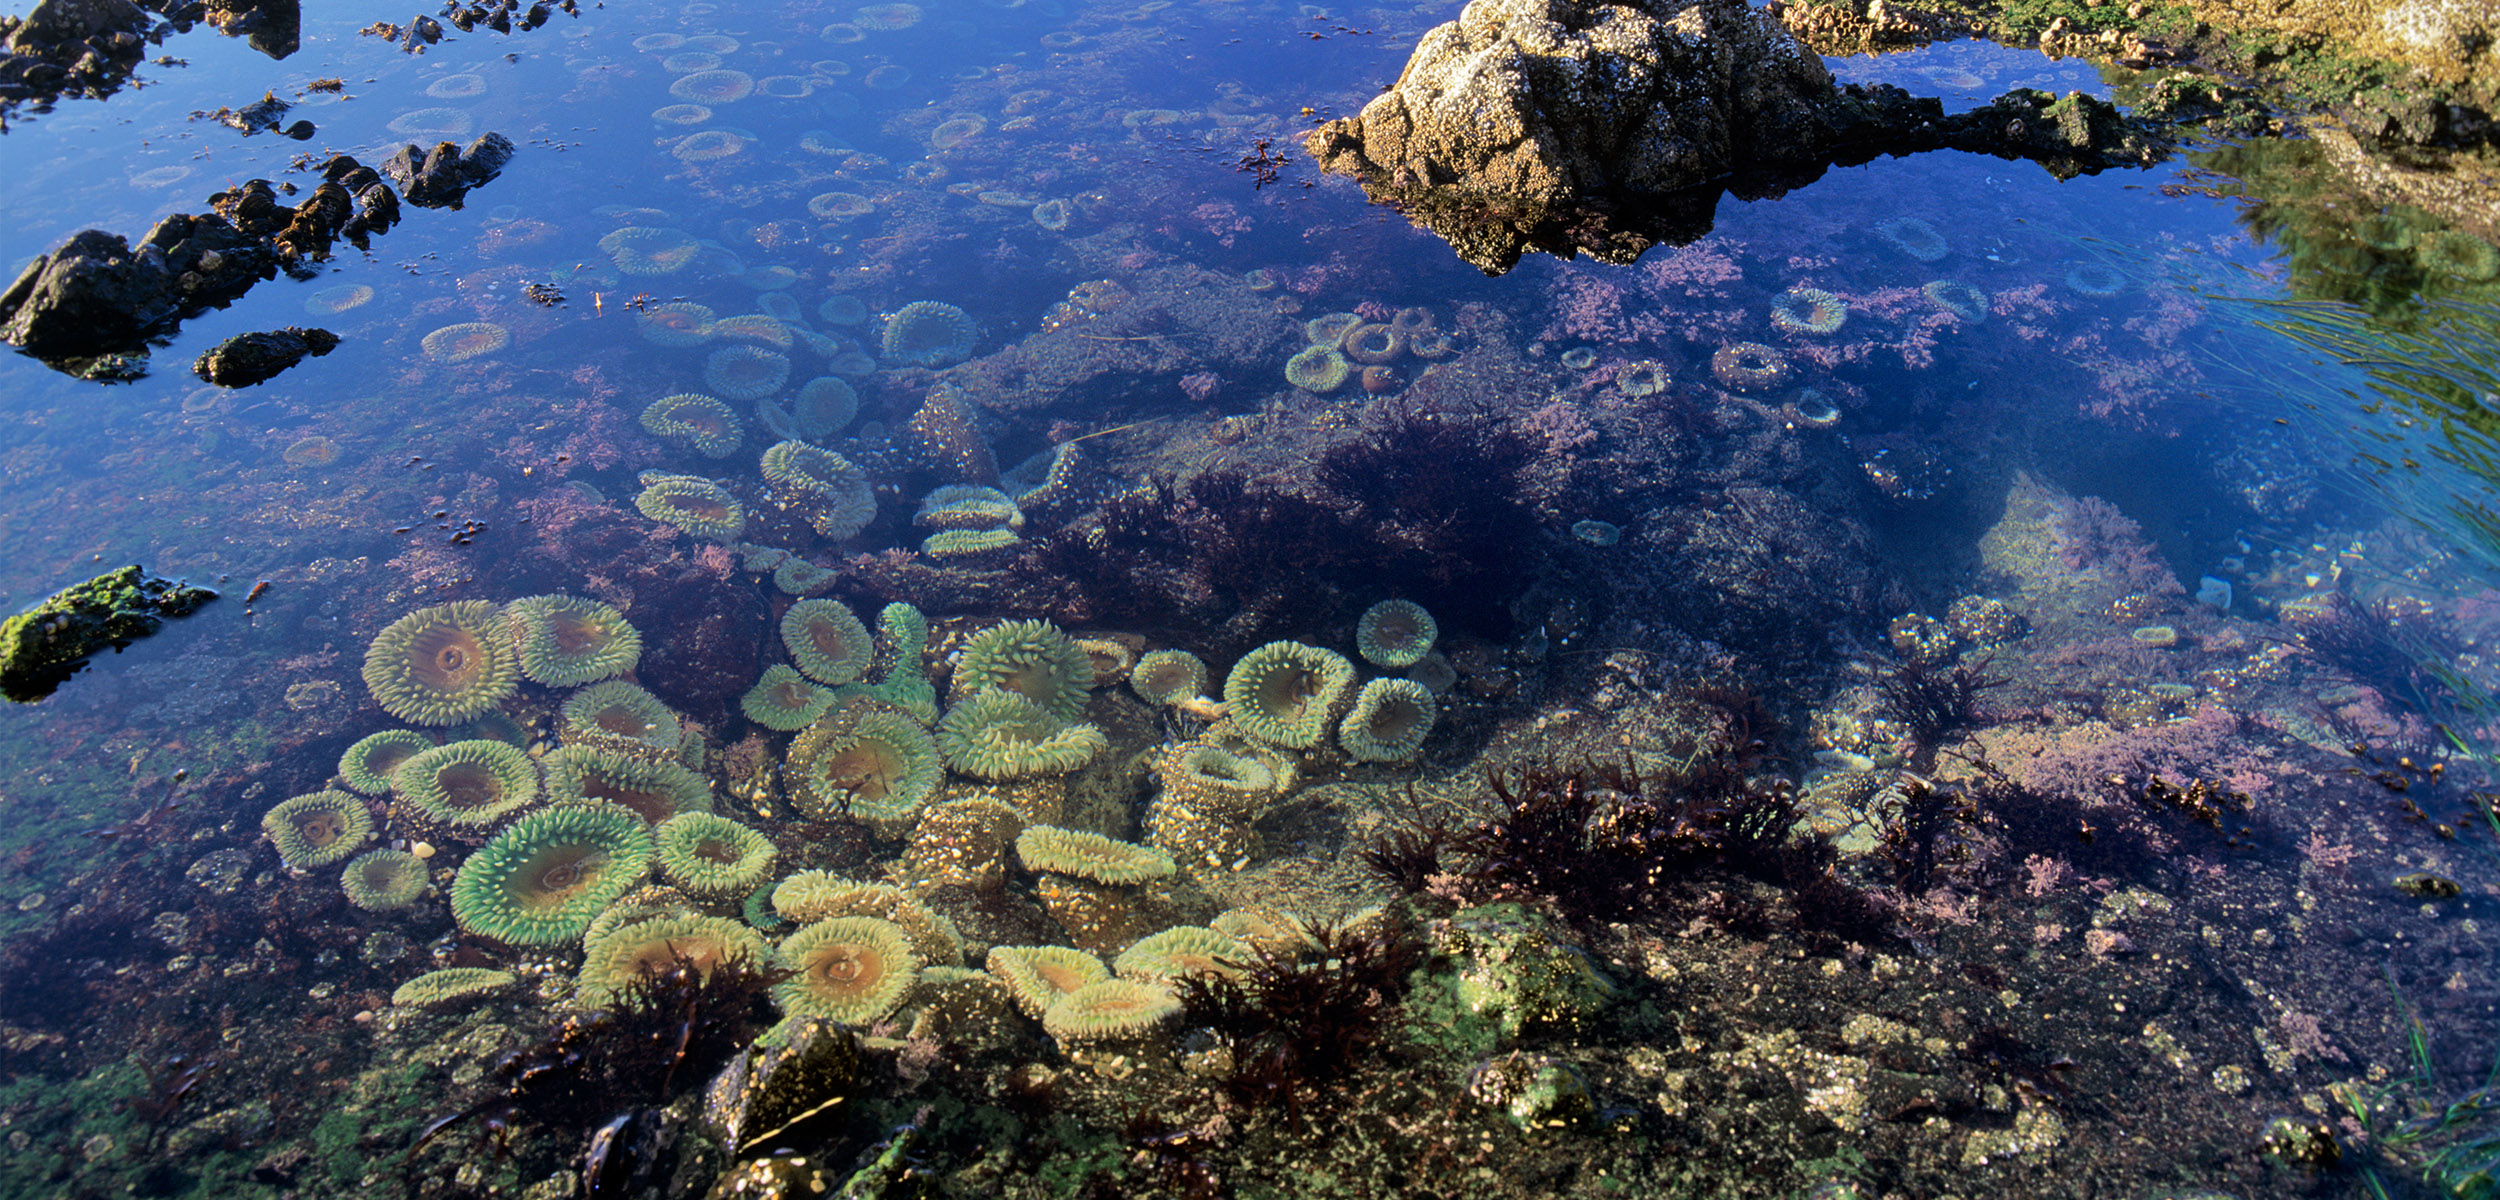 A tide pool sits at the front of the photo the ocean sitting behind with some clifss. The pool is filled with colour anemones and mussels